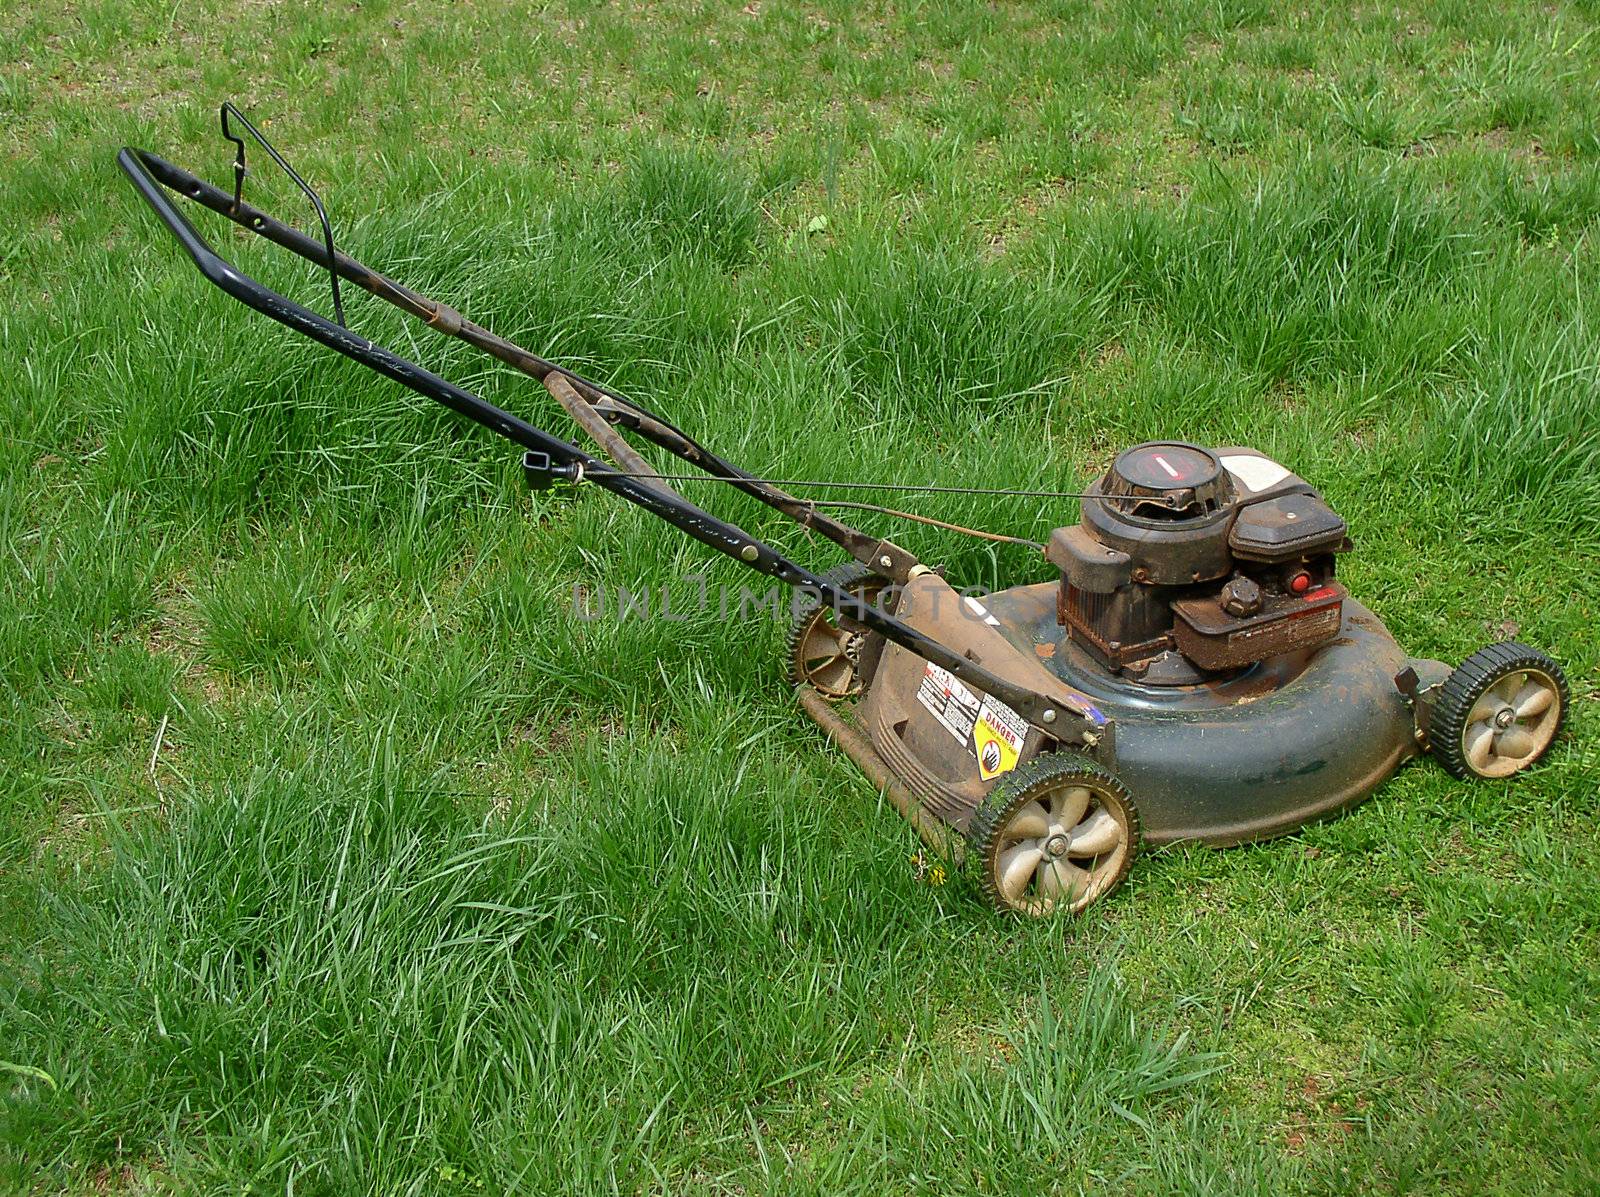 A dusty gasoline-powered push lawnmower stands in long grass which is badly in need of mowing.